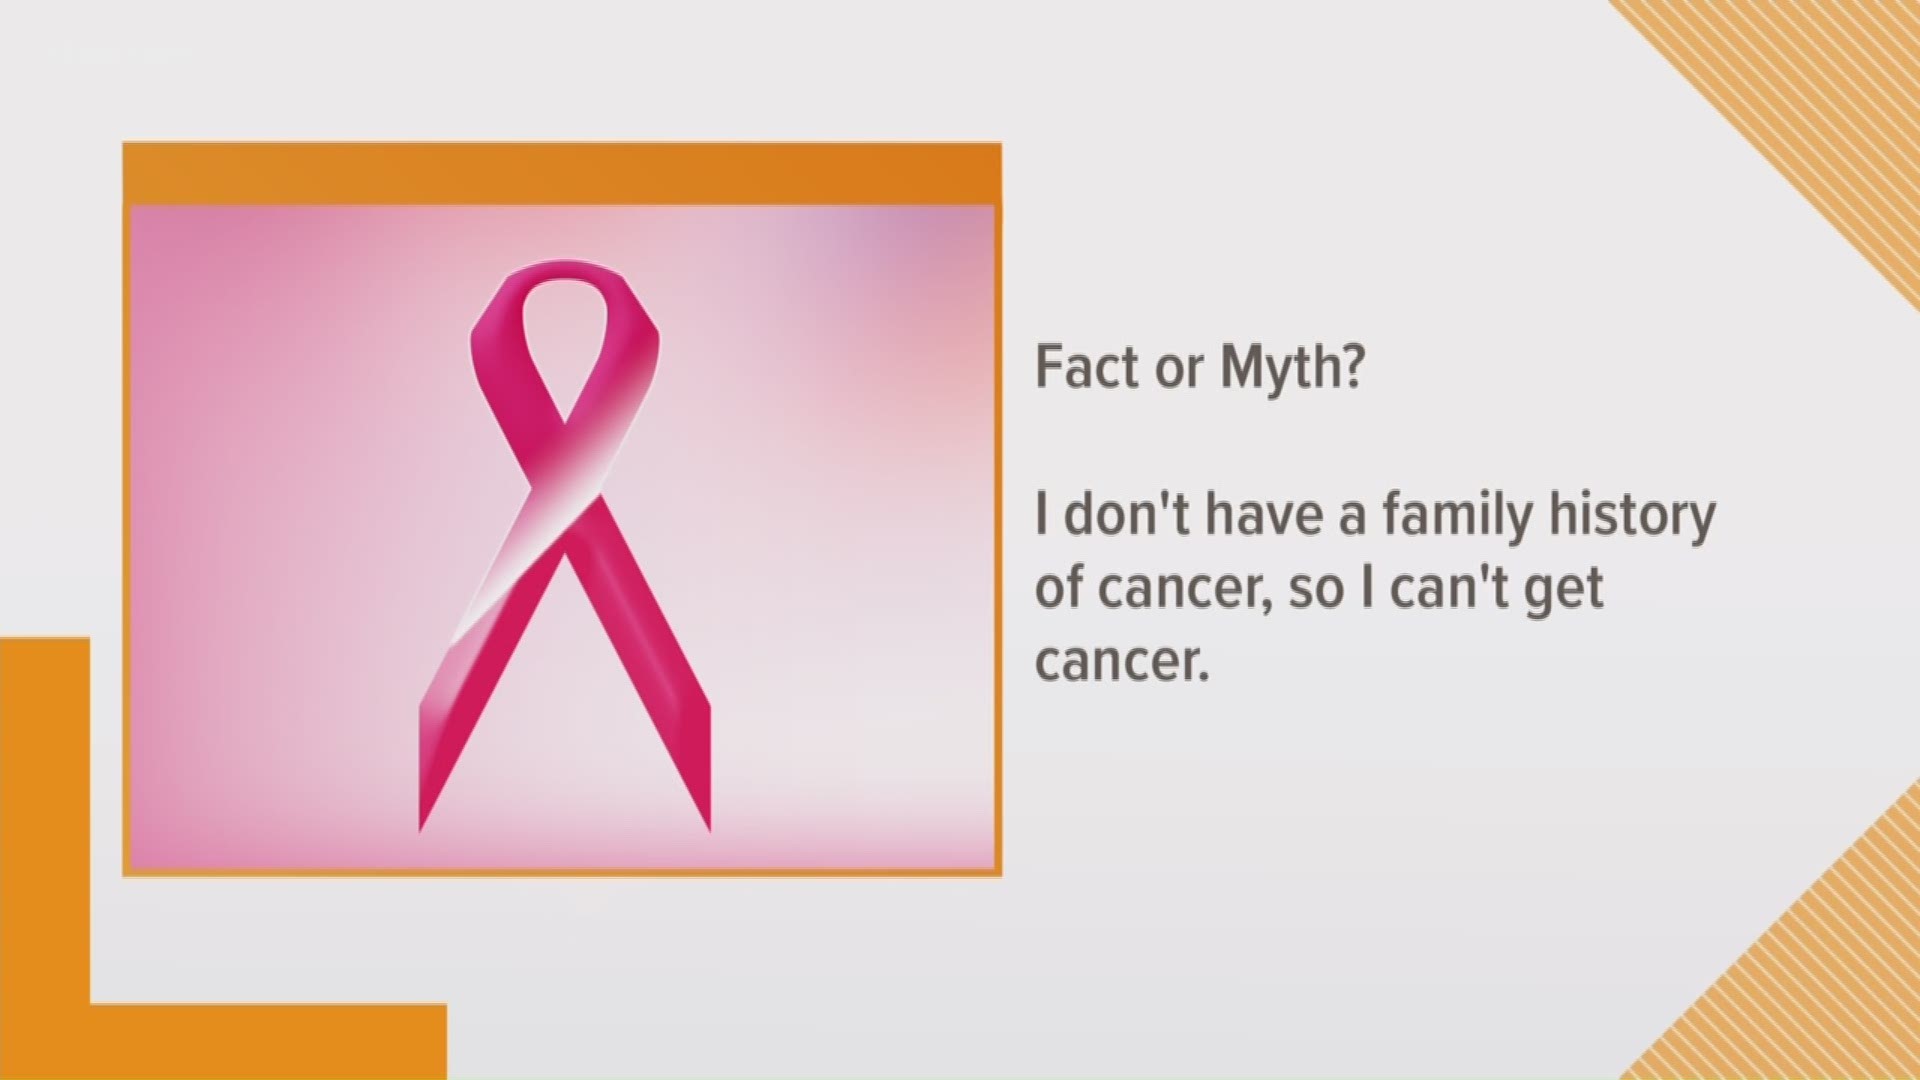 Dr. Katrina Birdwell, a breast specialist from Texas Onocology, joins the Daybreak team for a game of Fact or Myth on breast cancer.